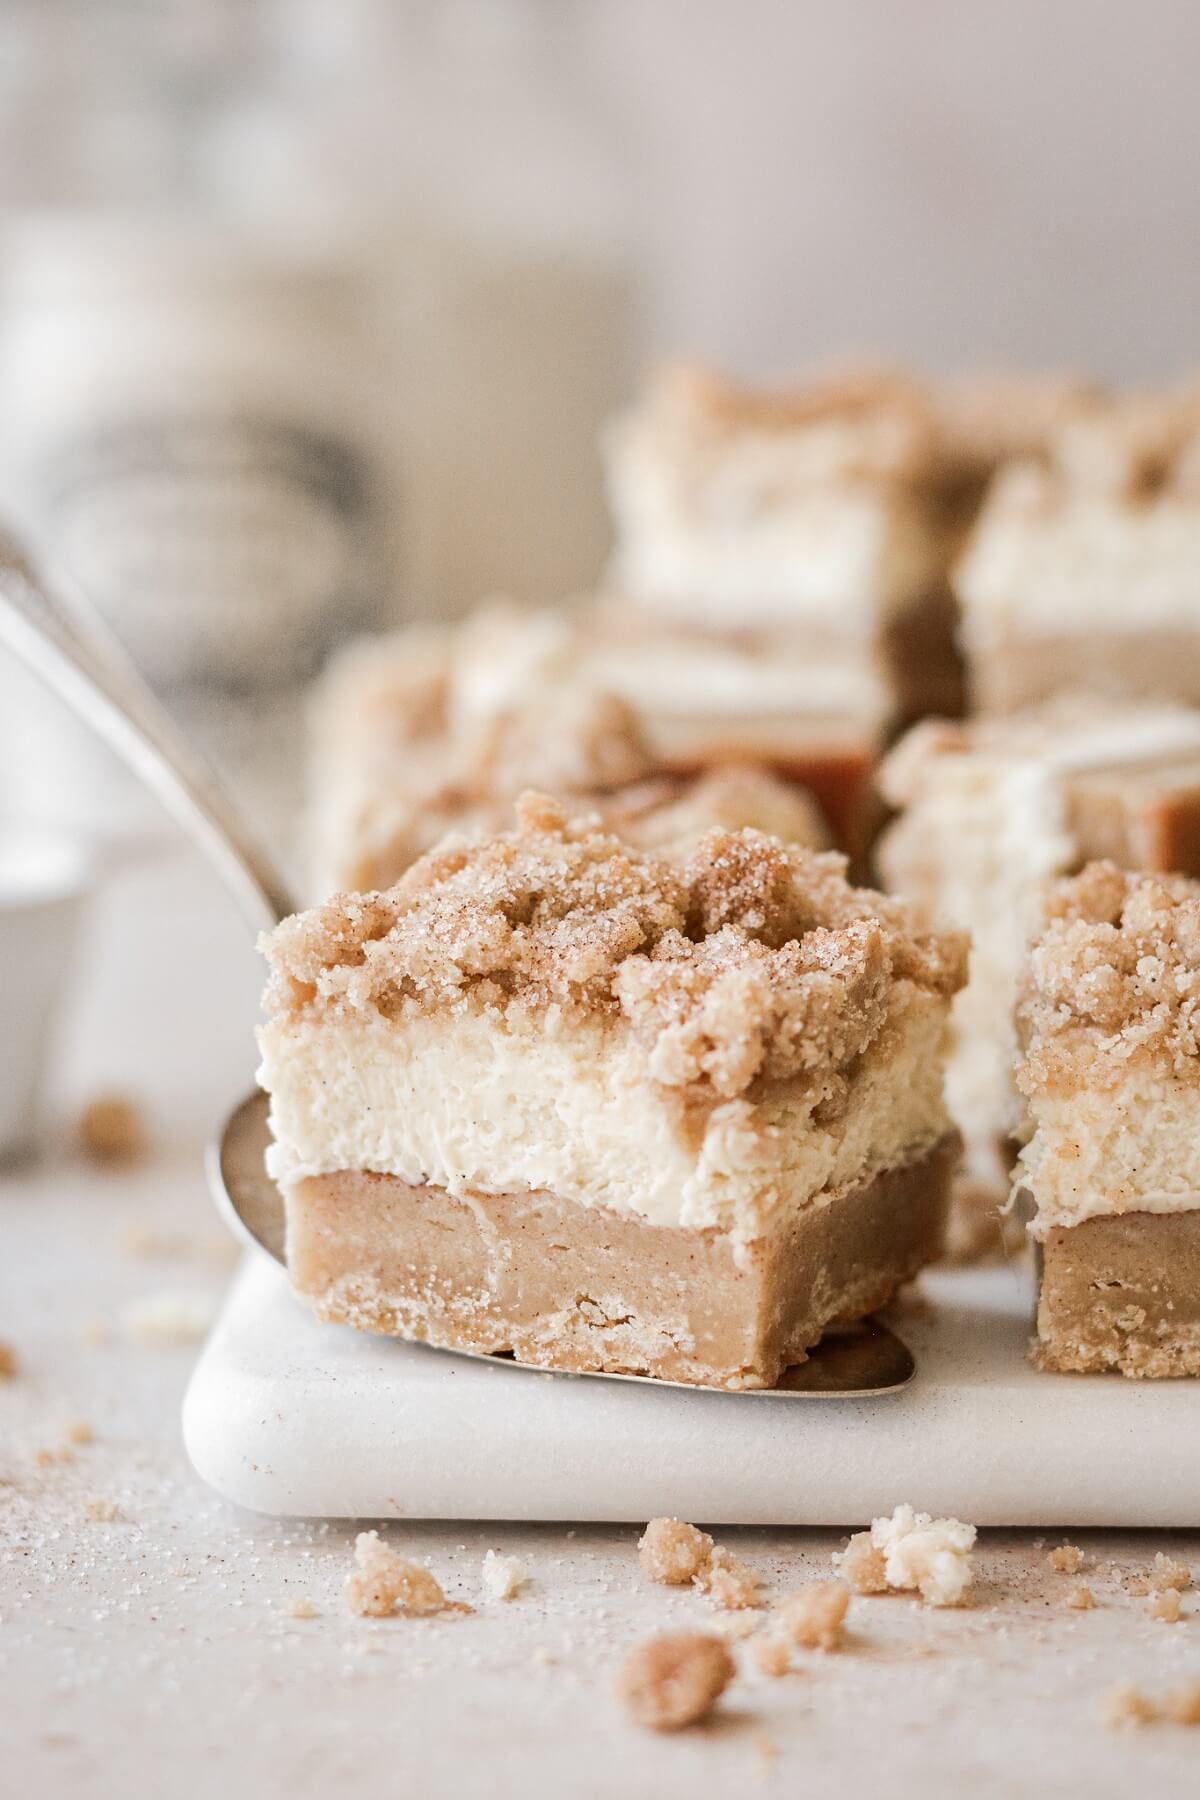 Snickerdoodle cheesecake bars with crumb topping.